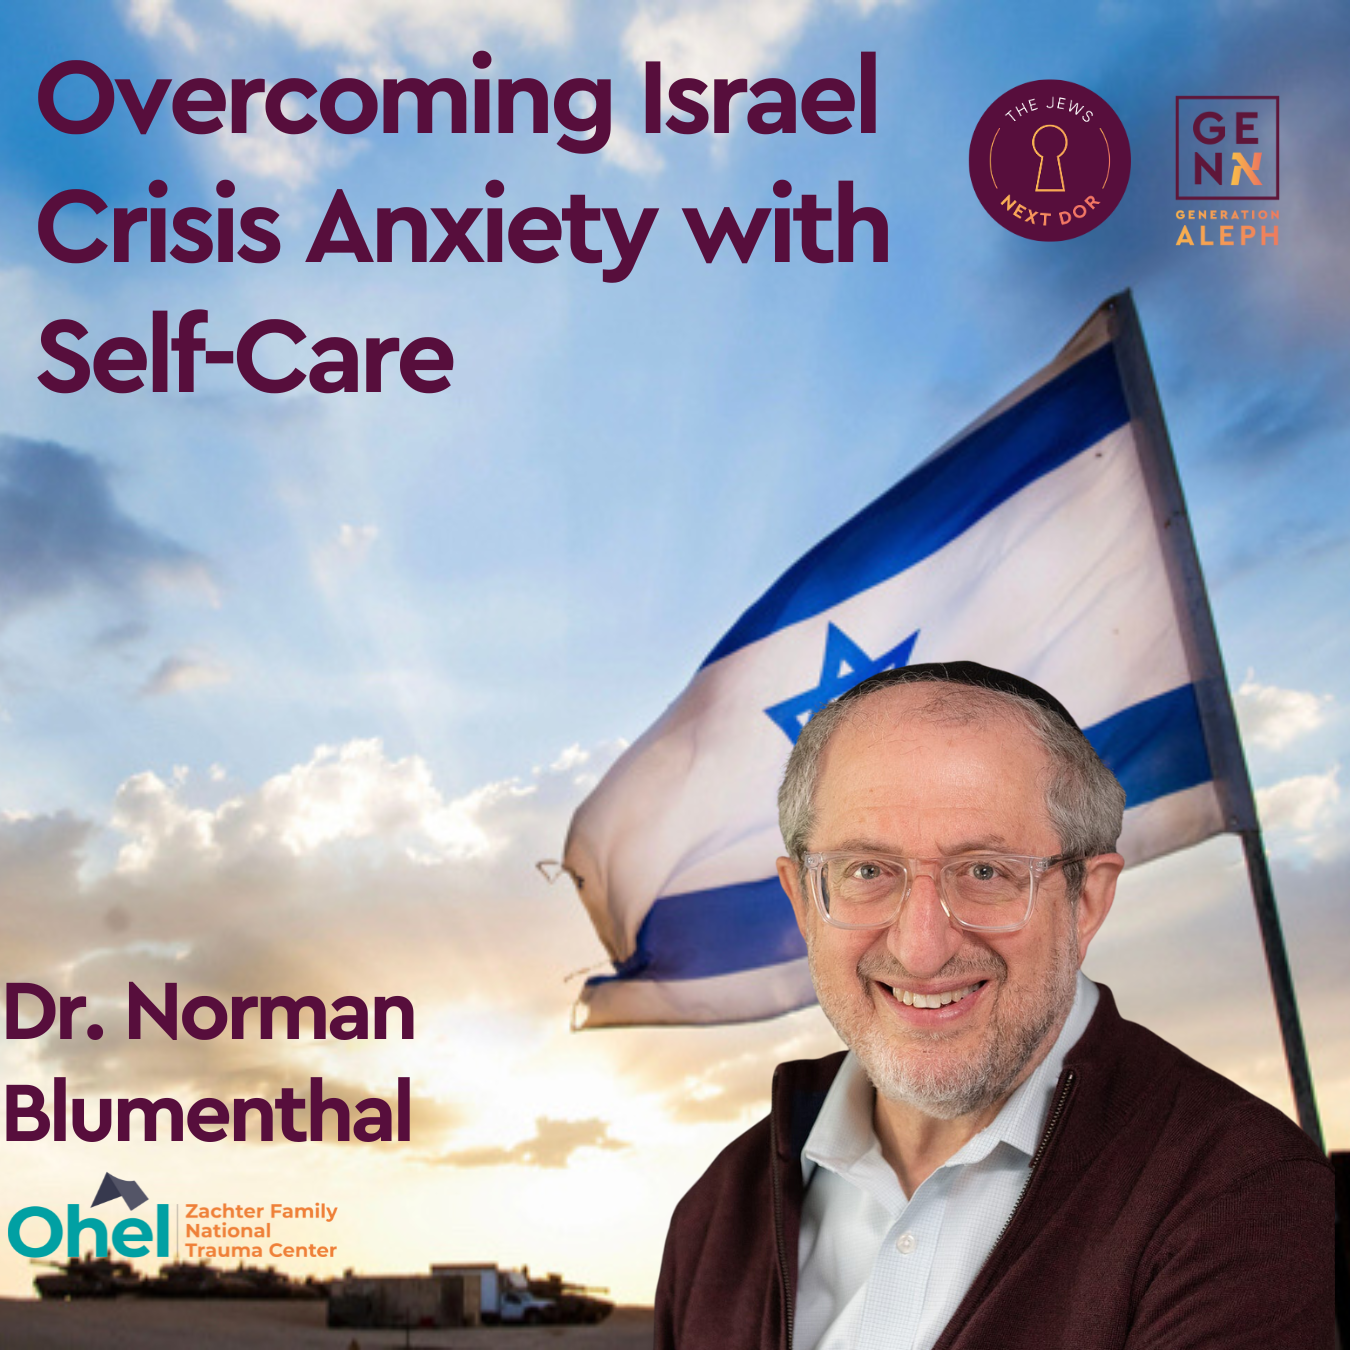 Overcoming Fear & Anxiety Since the Israel Crisis: Tools from a Trauma Expert | Dr. Norman Blumenthal